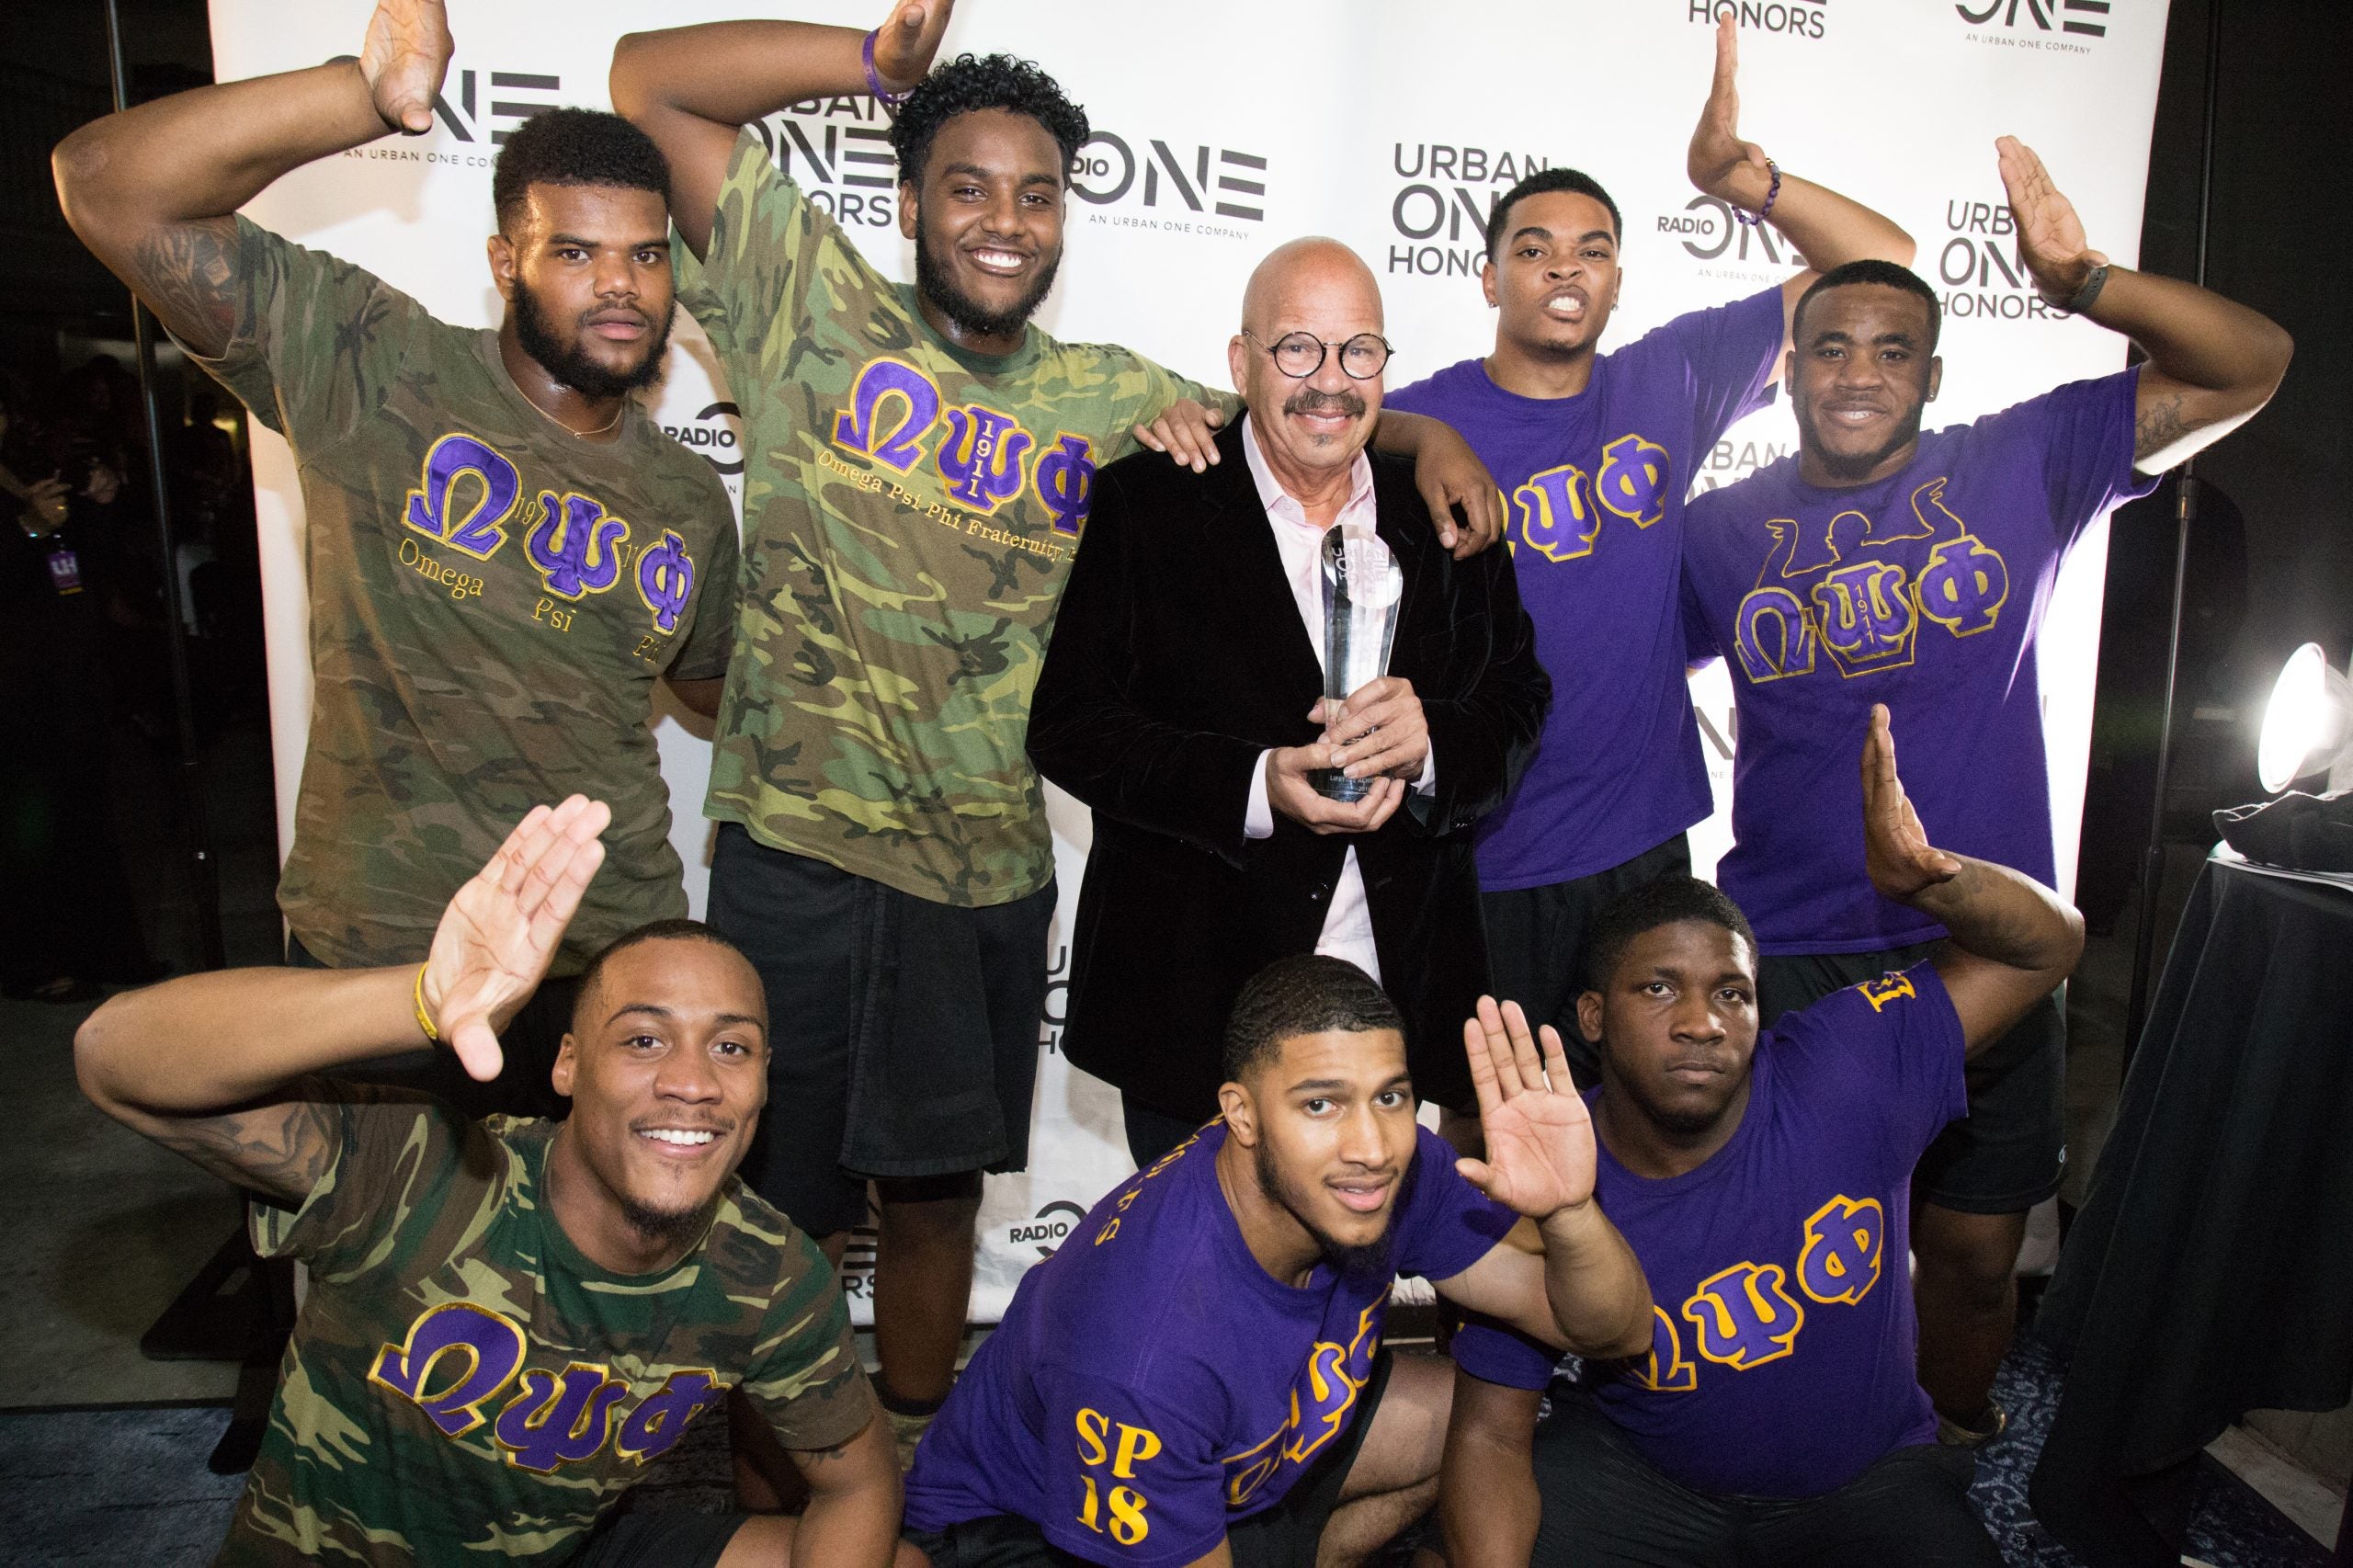 Did You Know These Black Men Were In Omega Psi Phi Fraternity?